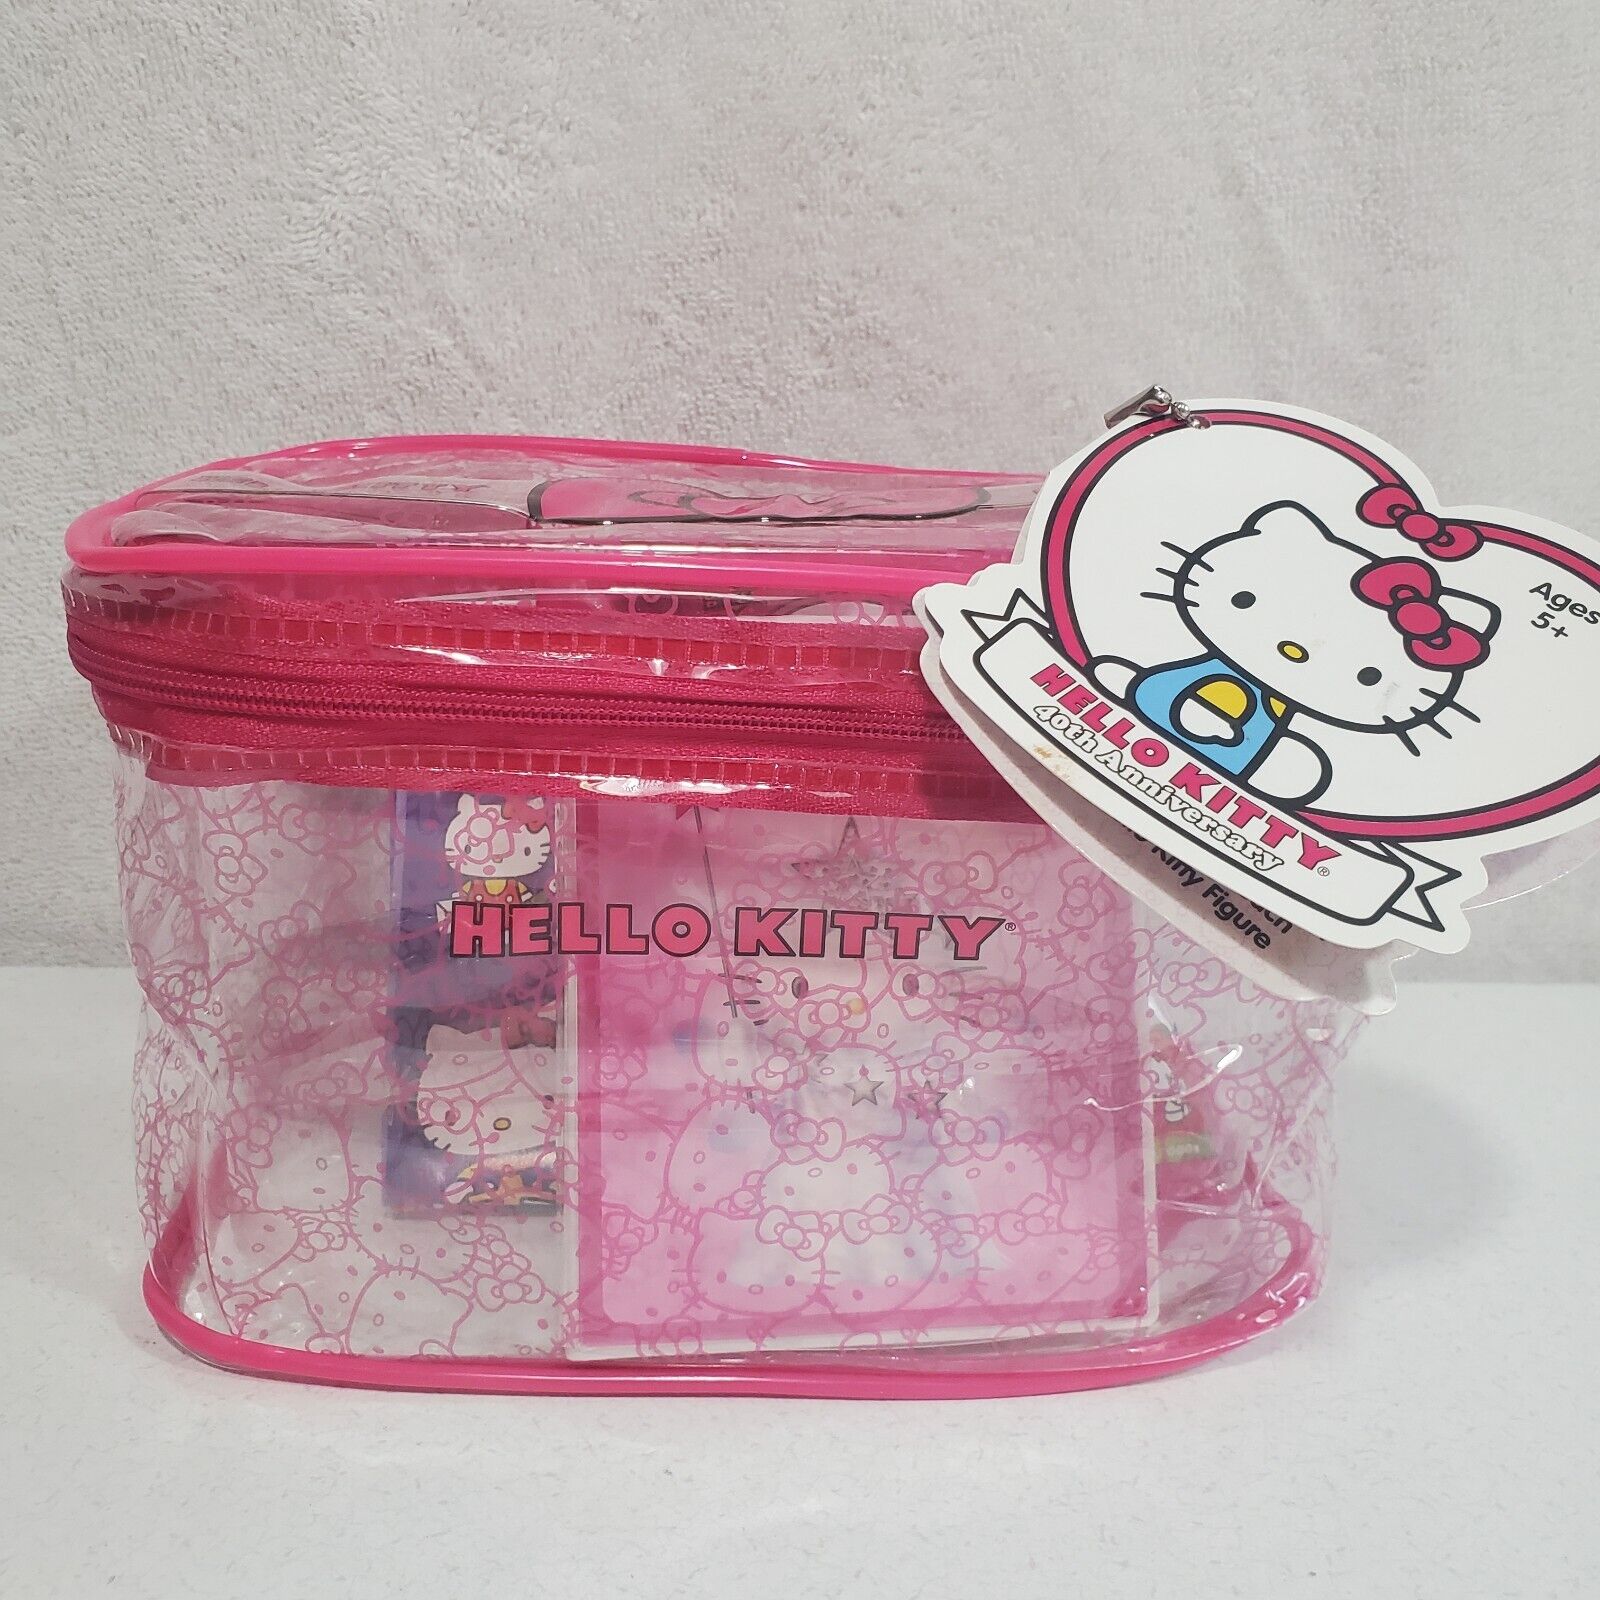 2014 Upper Deck Hello Kitty 40th Anniversary Carry Case w2 Trading Card Fun Pack